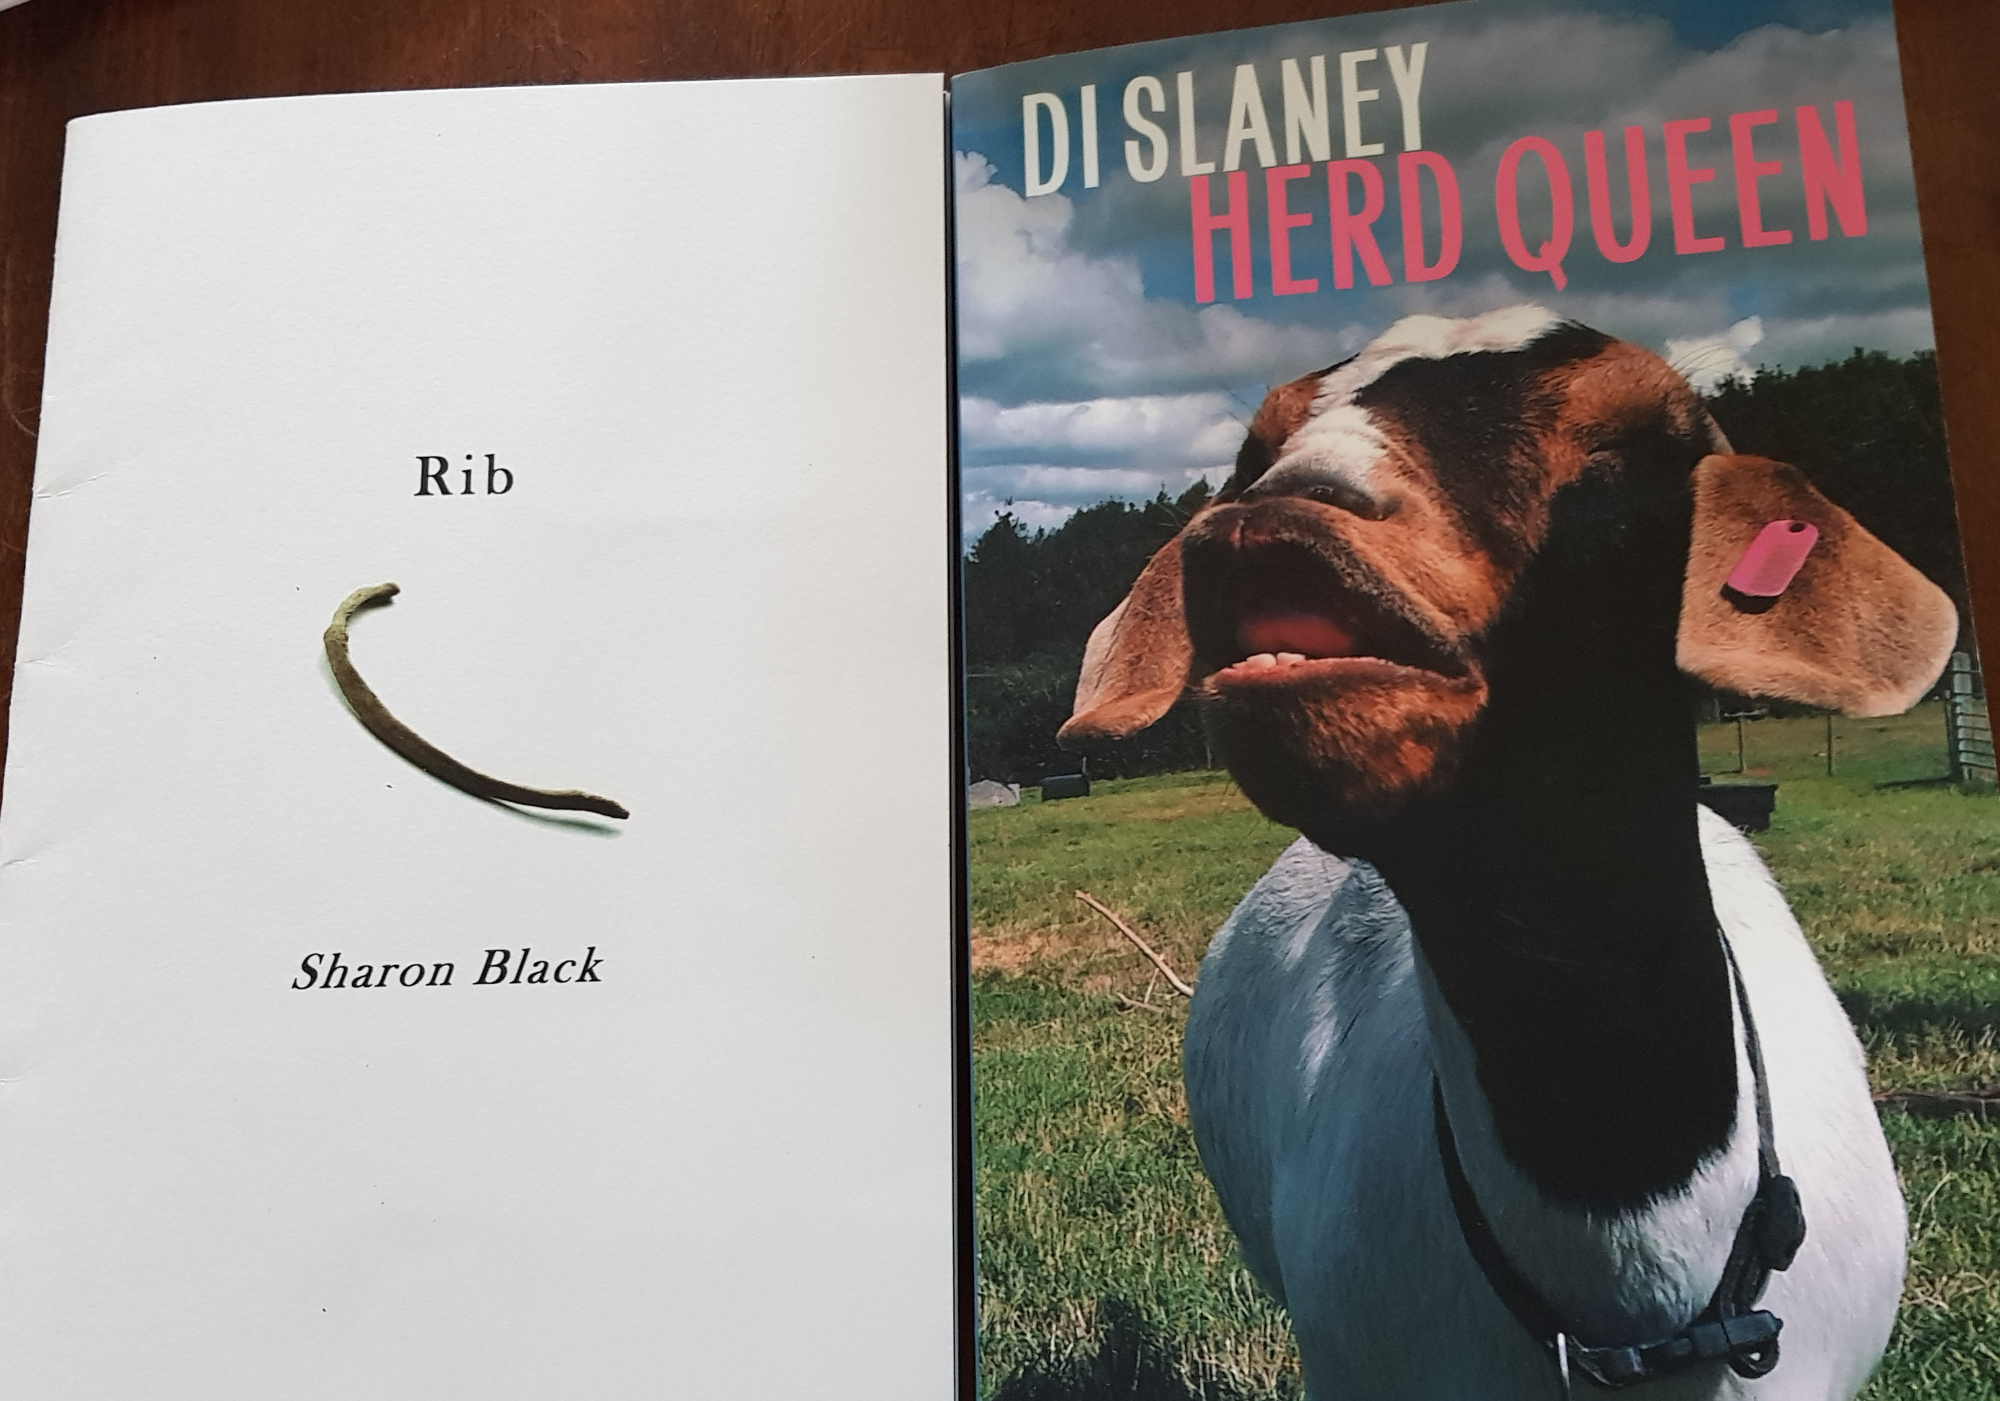 Recent poetry by Sharon Black and Di Slaney